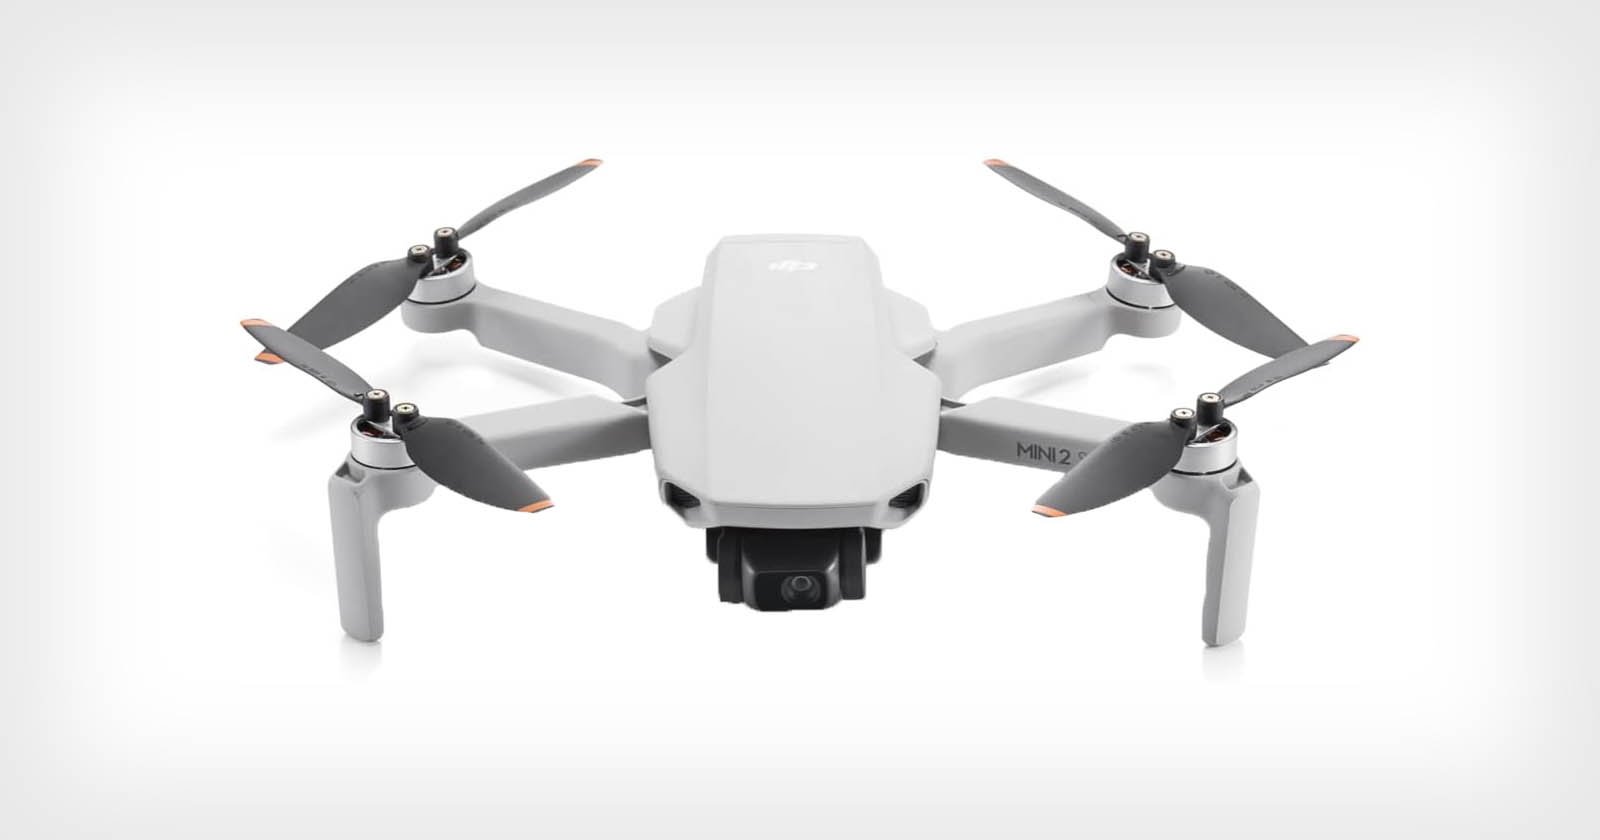 The DJI Wishlist: 6 Features Wed Like to See in Upcoming Drones